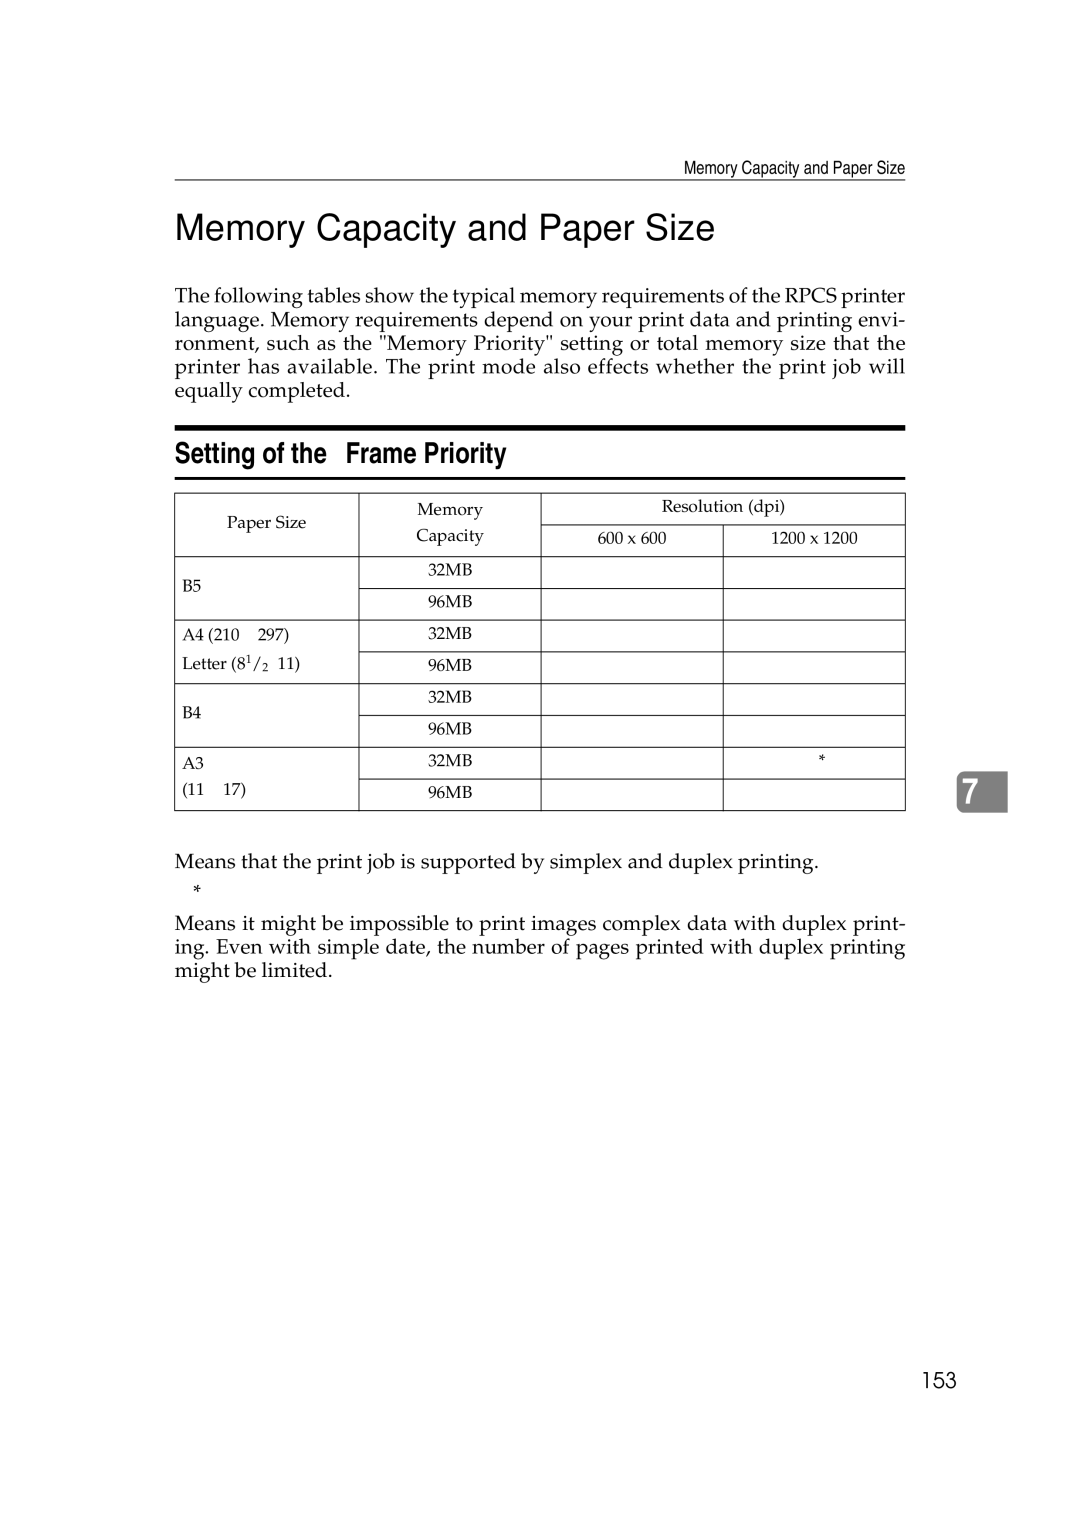 Lanier AP2610 manual Memory Capacity and Paper Size, Setting of the Frame Priority, 153 